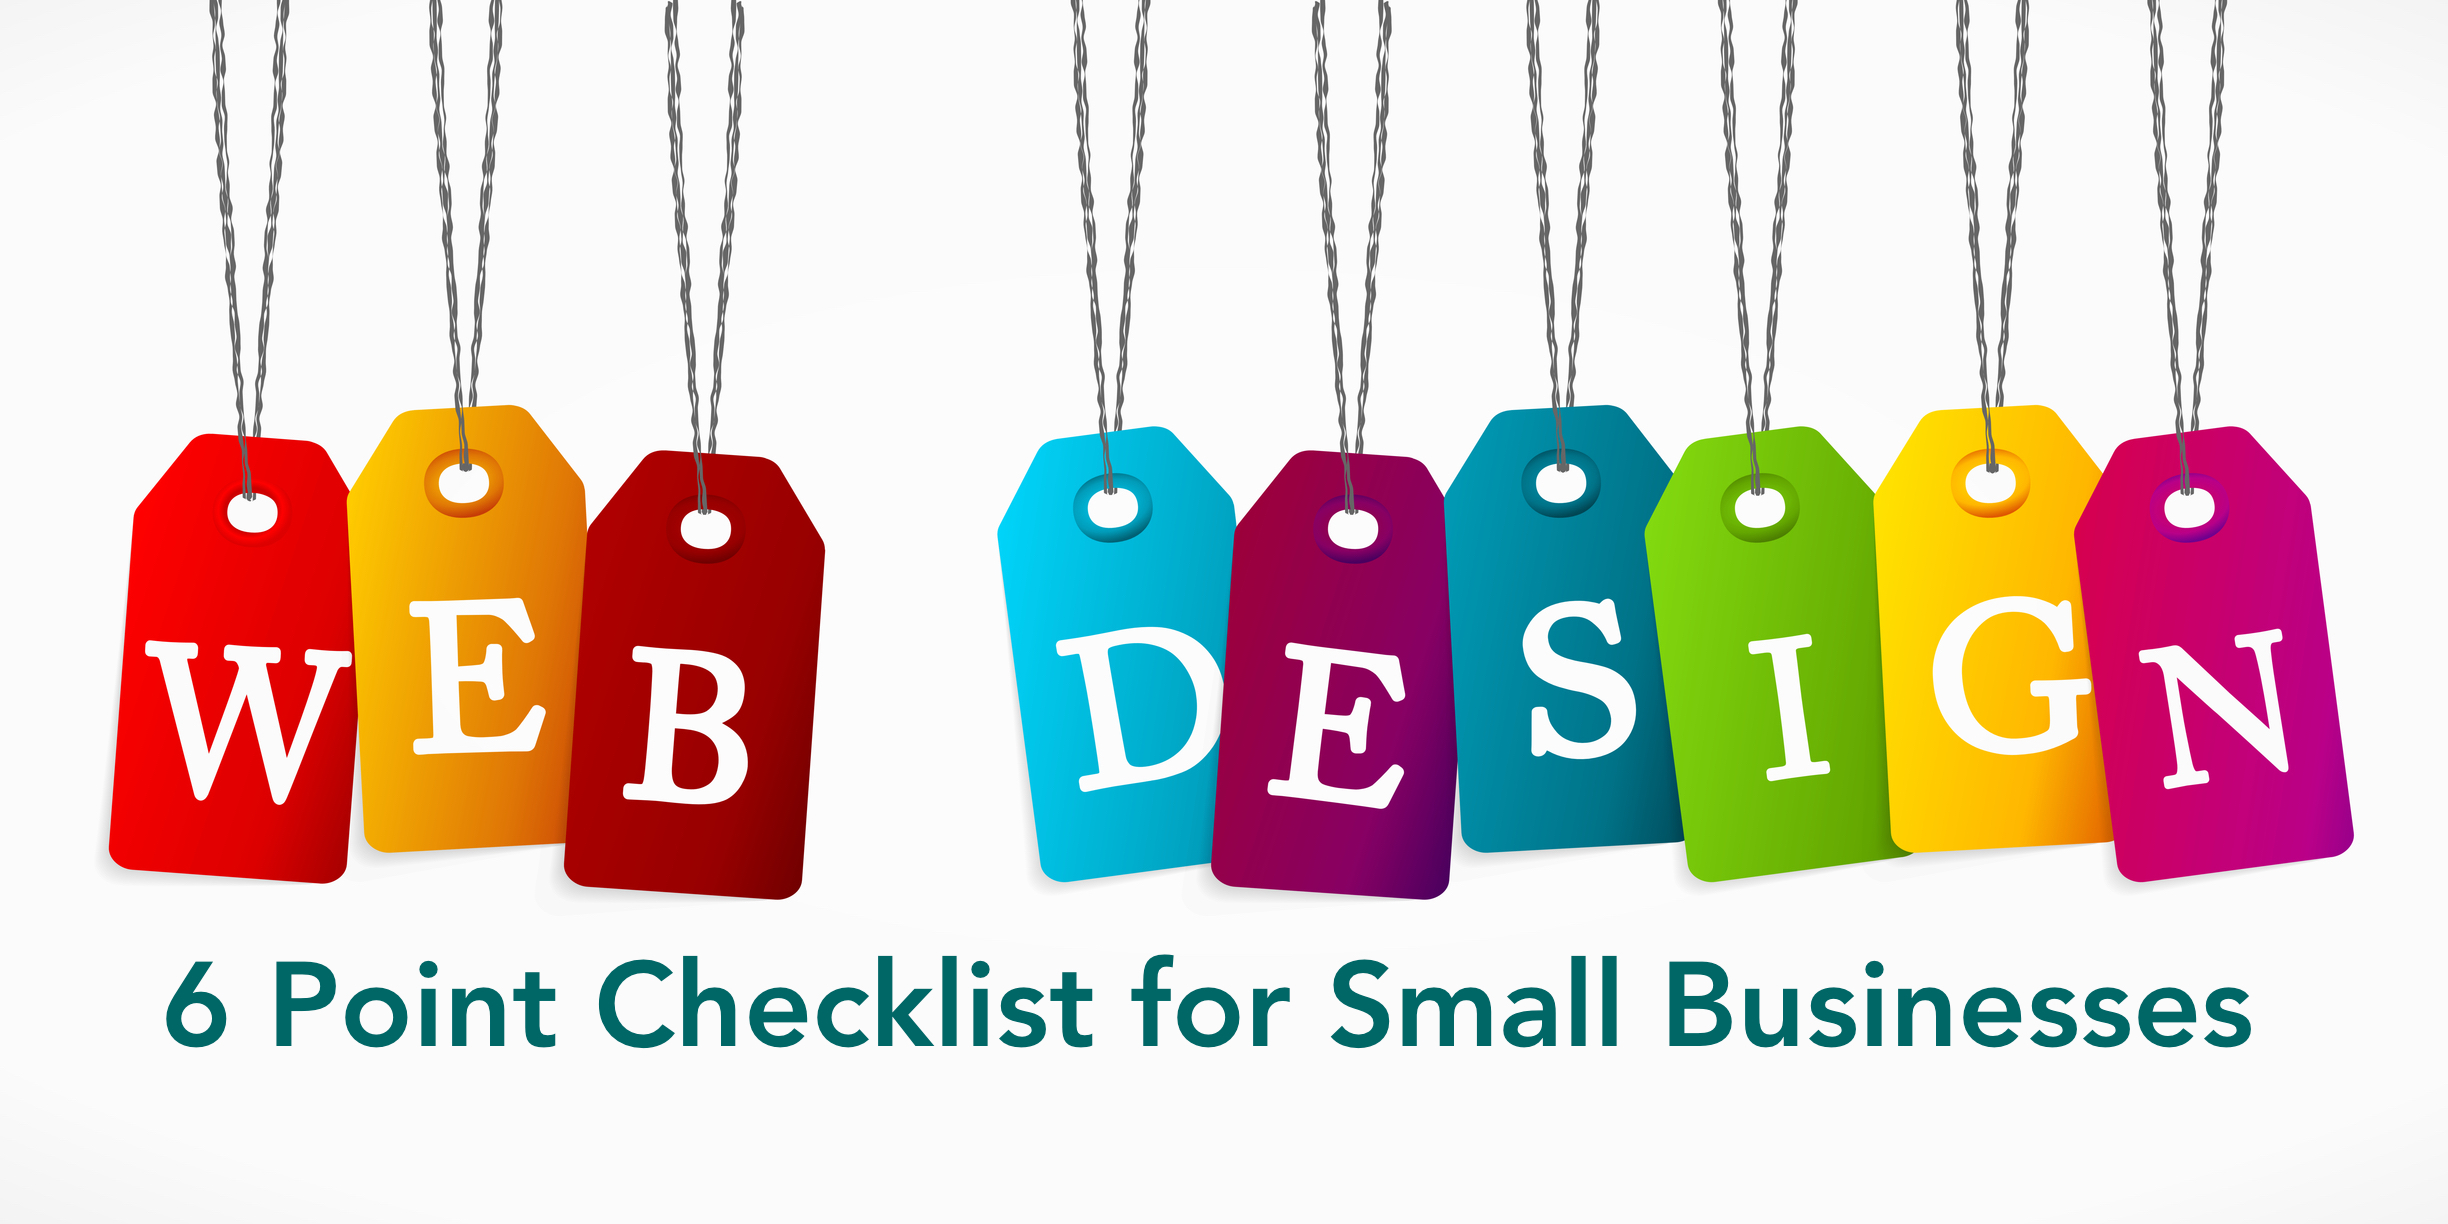 6 Point Checklist for Small Businesses